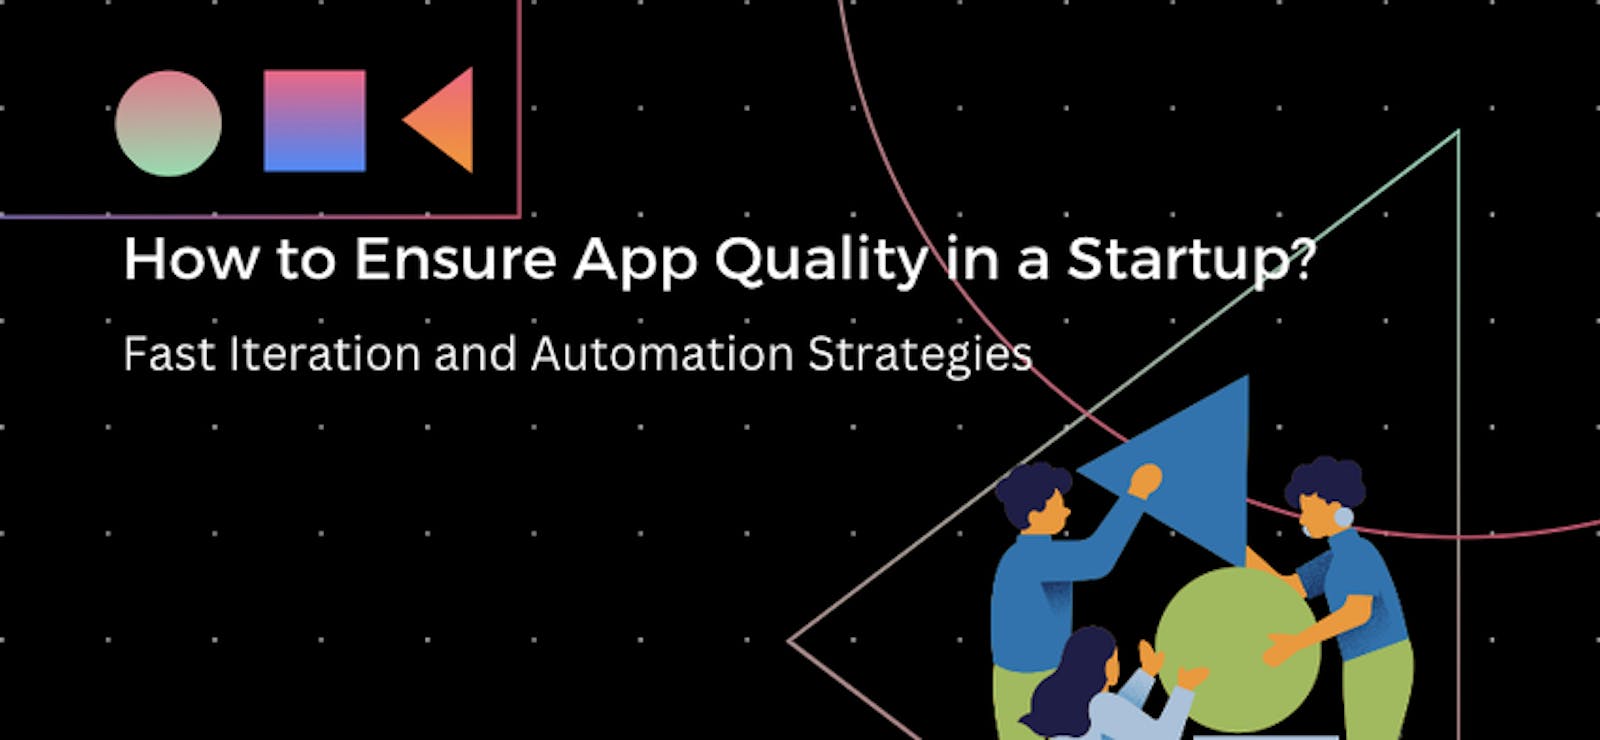 How to Ensure App Quality in a Startup: Fast Iteration and Automation Strategies